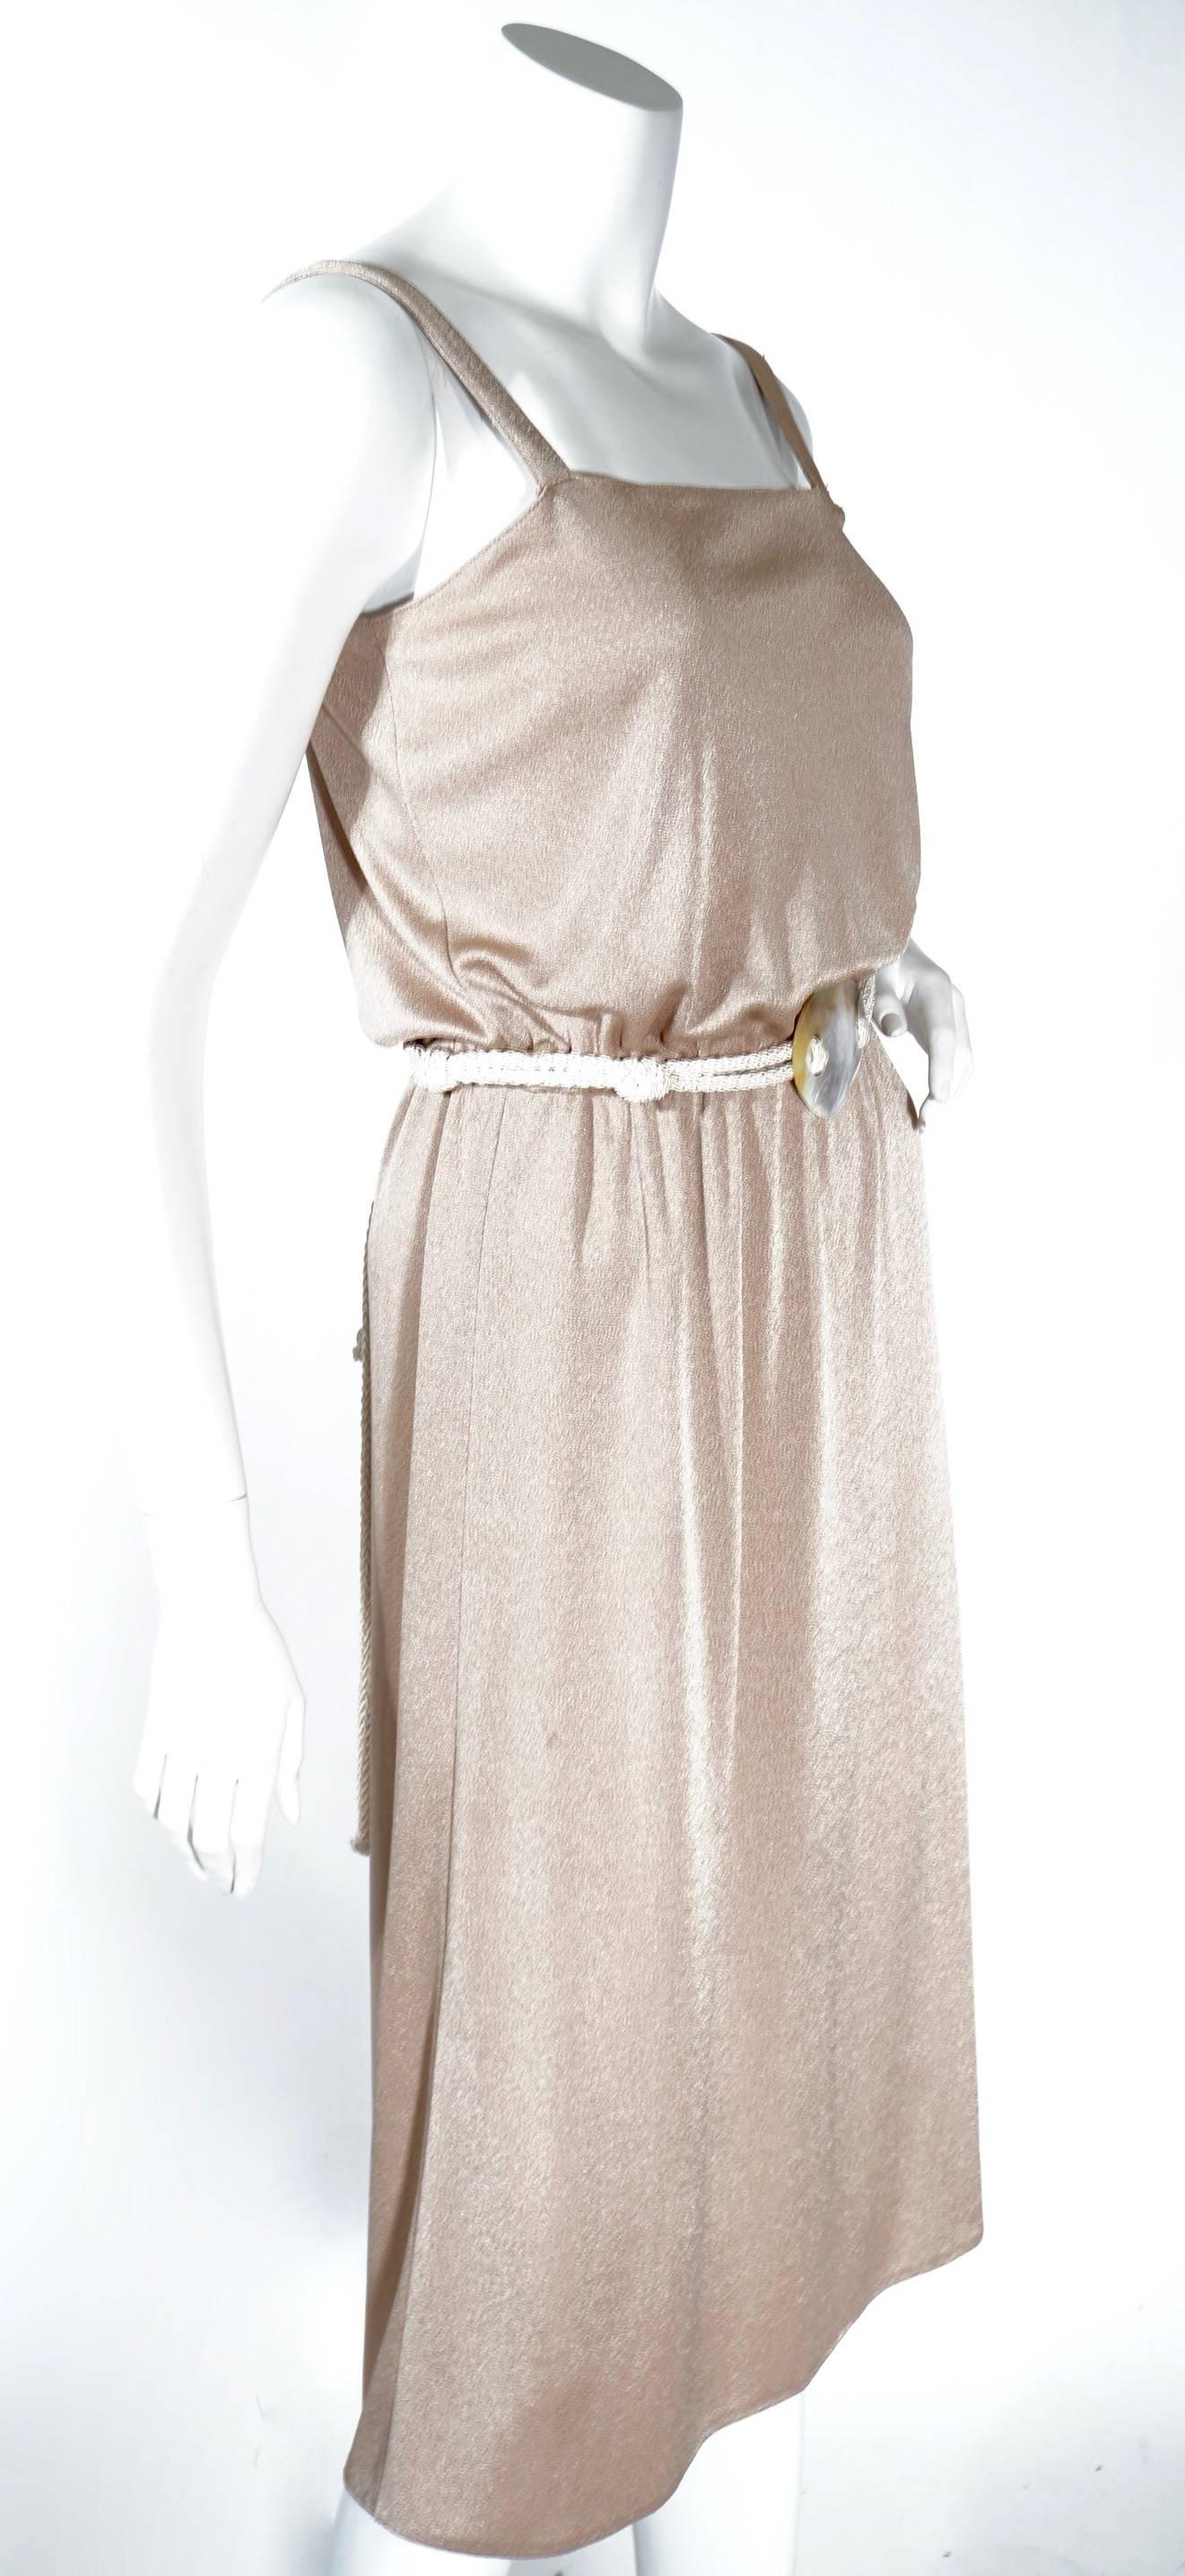 1970s beige grecian style dress. This dress features a rope style belt with a shell centerpiece. This pieces is right on trend and perfect for spring/summer 16'. Very authentic and wearable/ Very good condition.

Zip back, elastic waist band 22in-